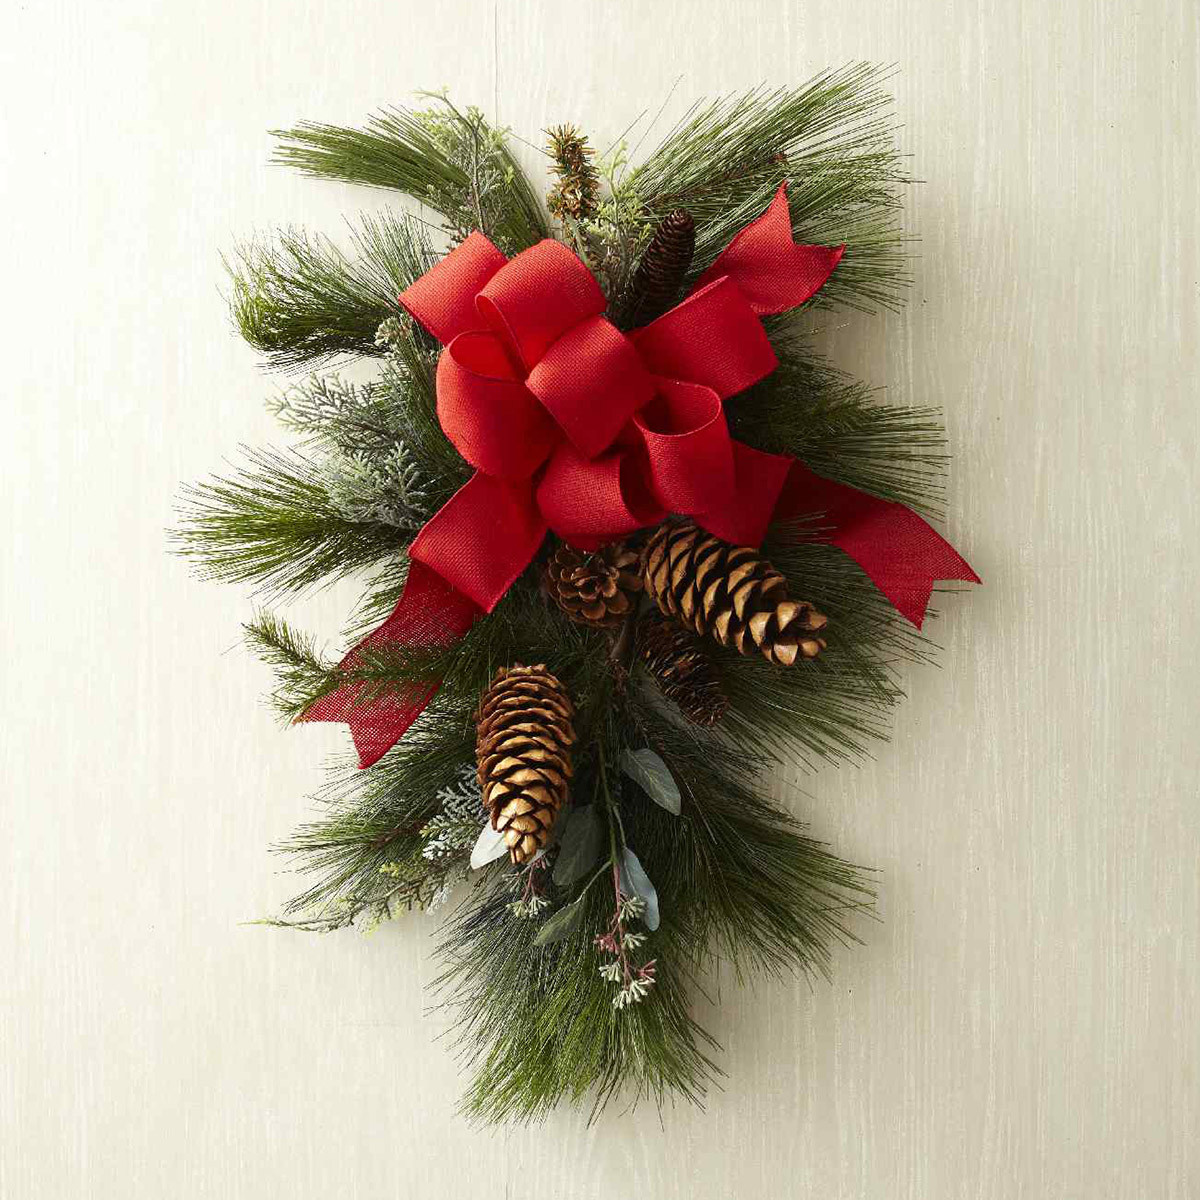 DIY Christmas Swag
 How to Make a Christmas Swag Wreath for Your Front Door